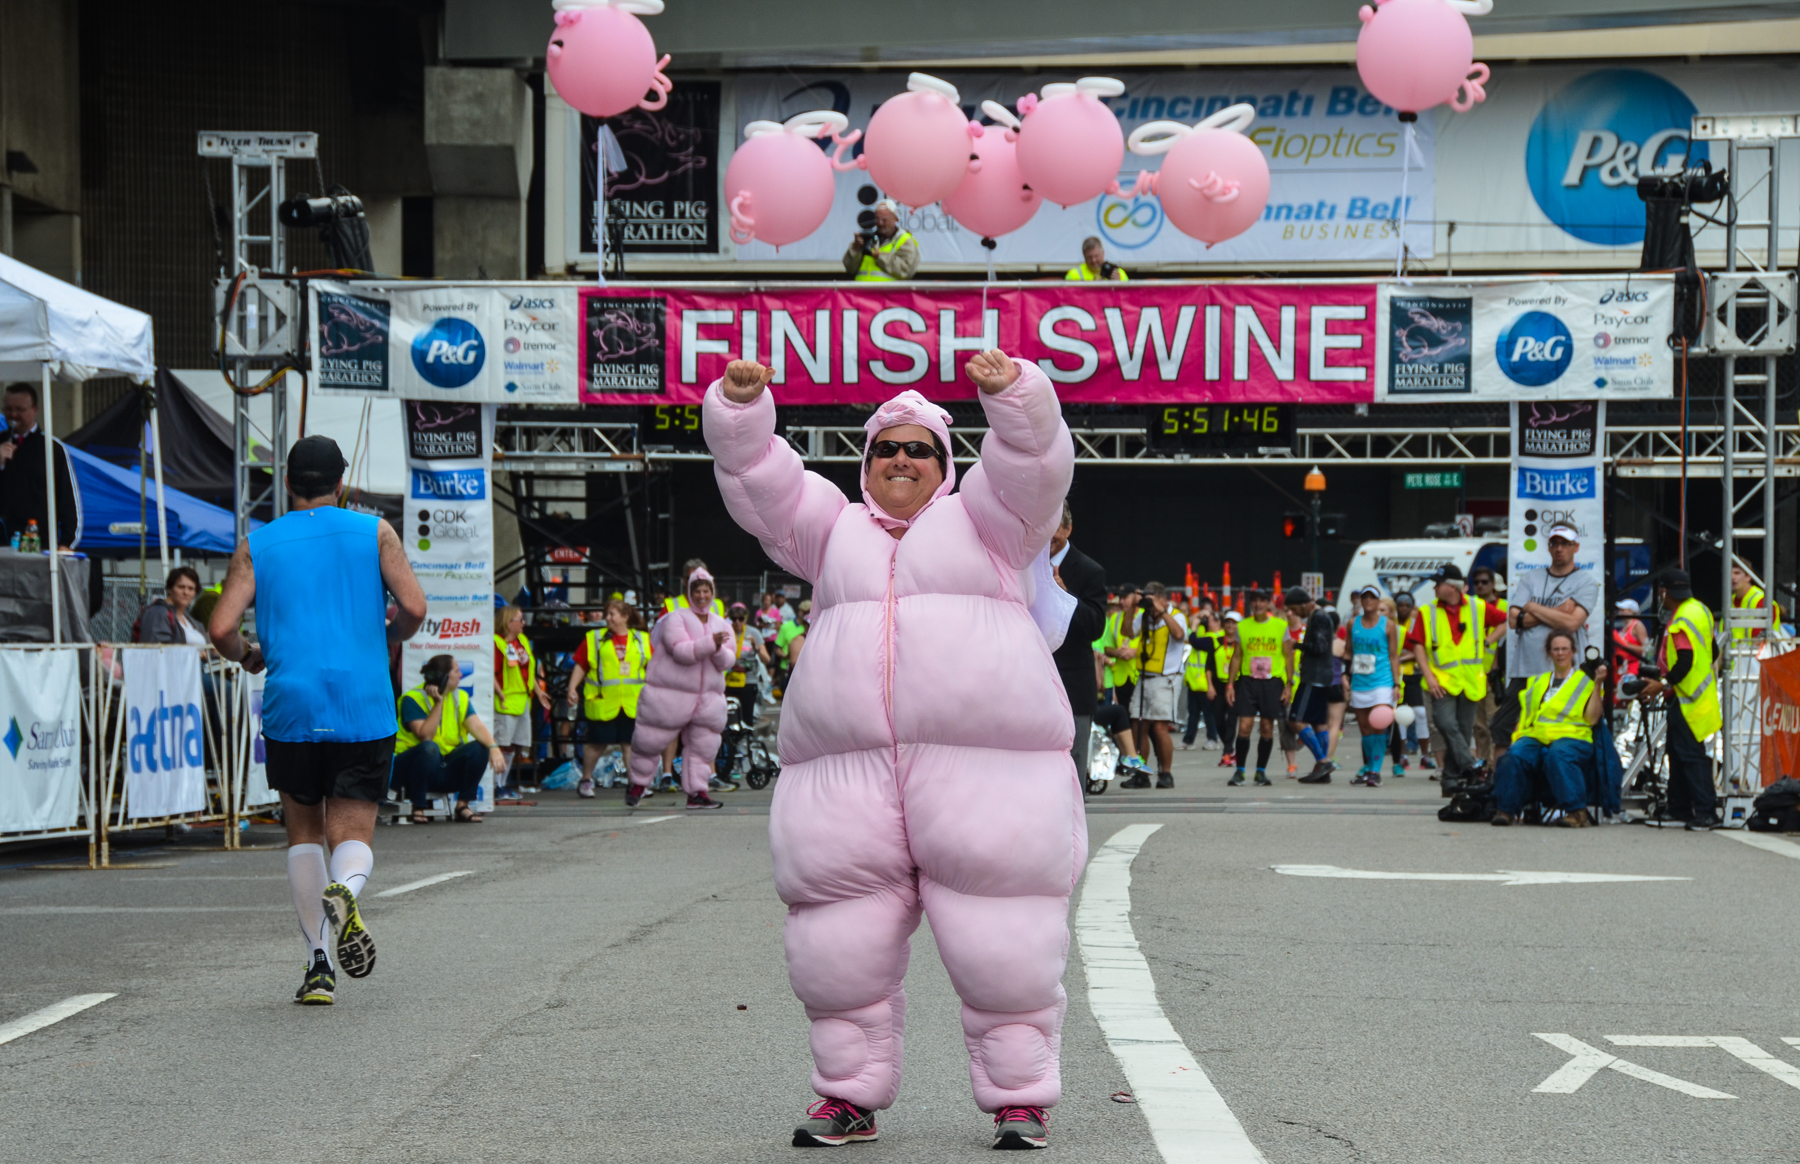 Flying Pig Marathon Earns Gold Level Inspire Status from Council for